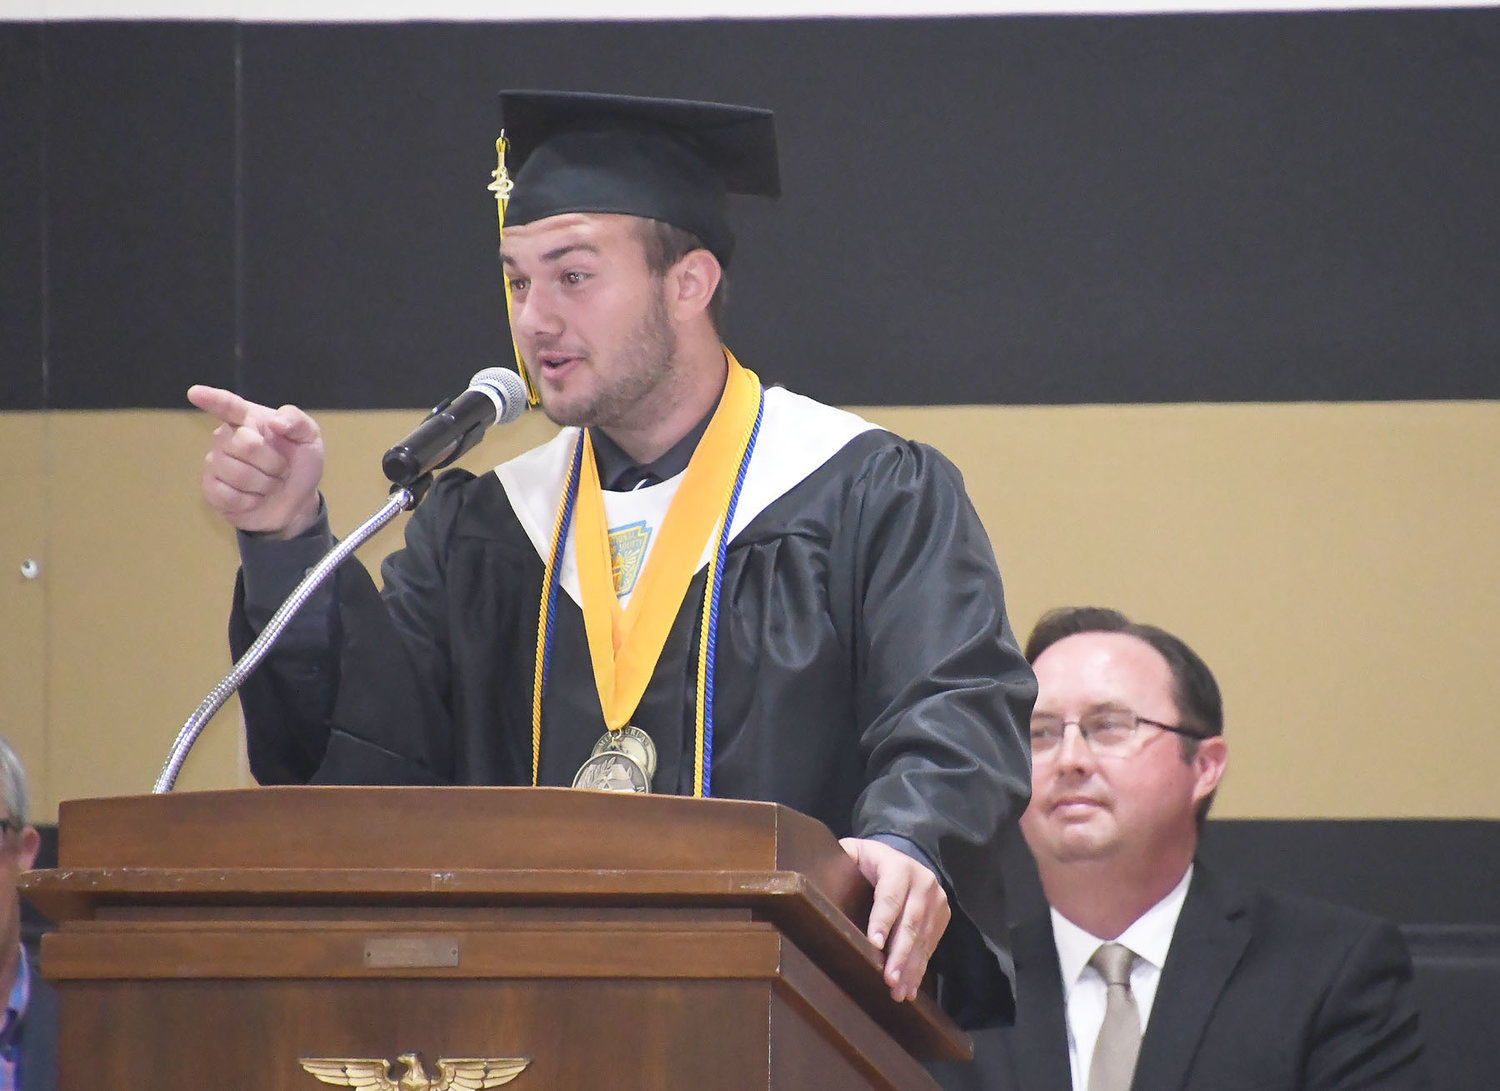 Class of 2022 graduate and co-valedictorian Trace Ackley points at a classmate during his speech.